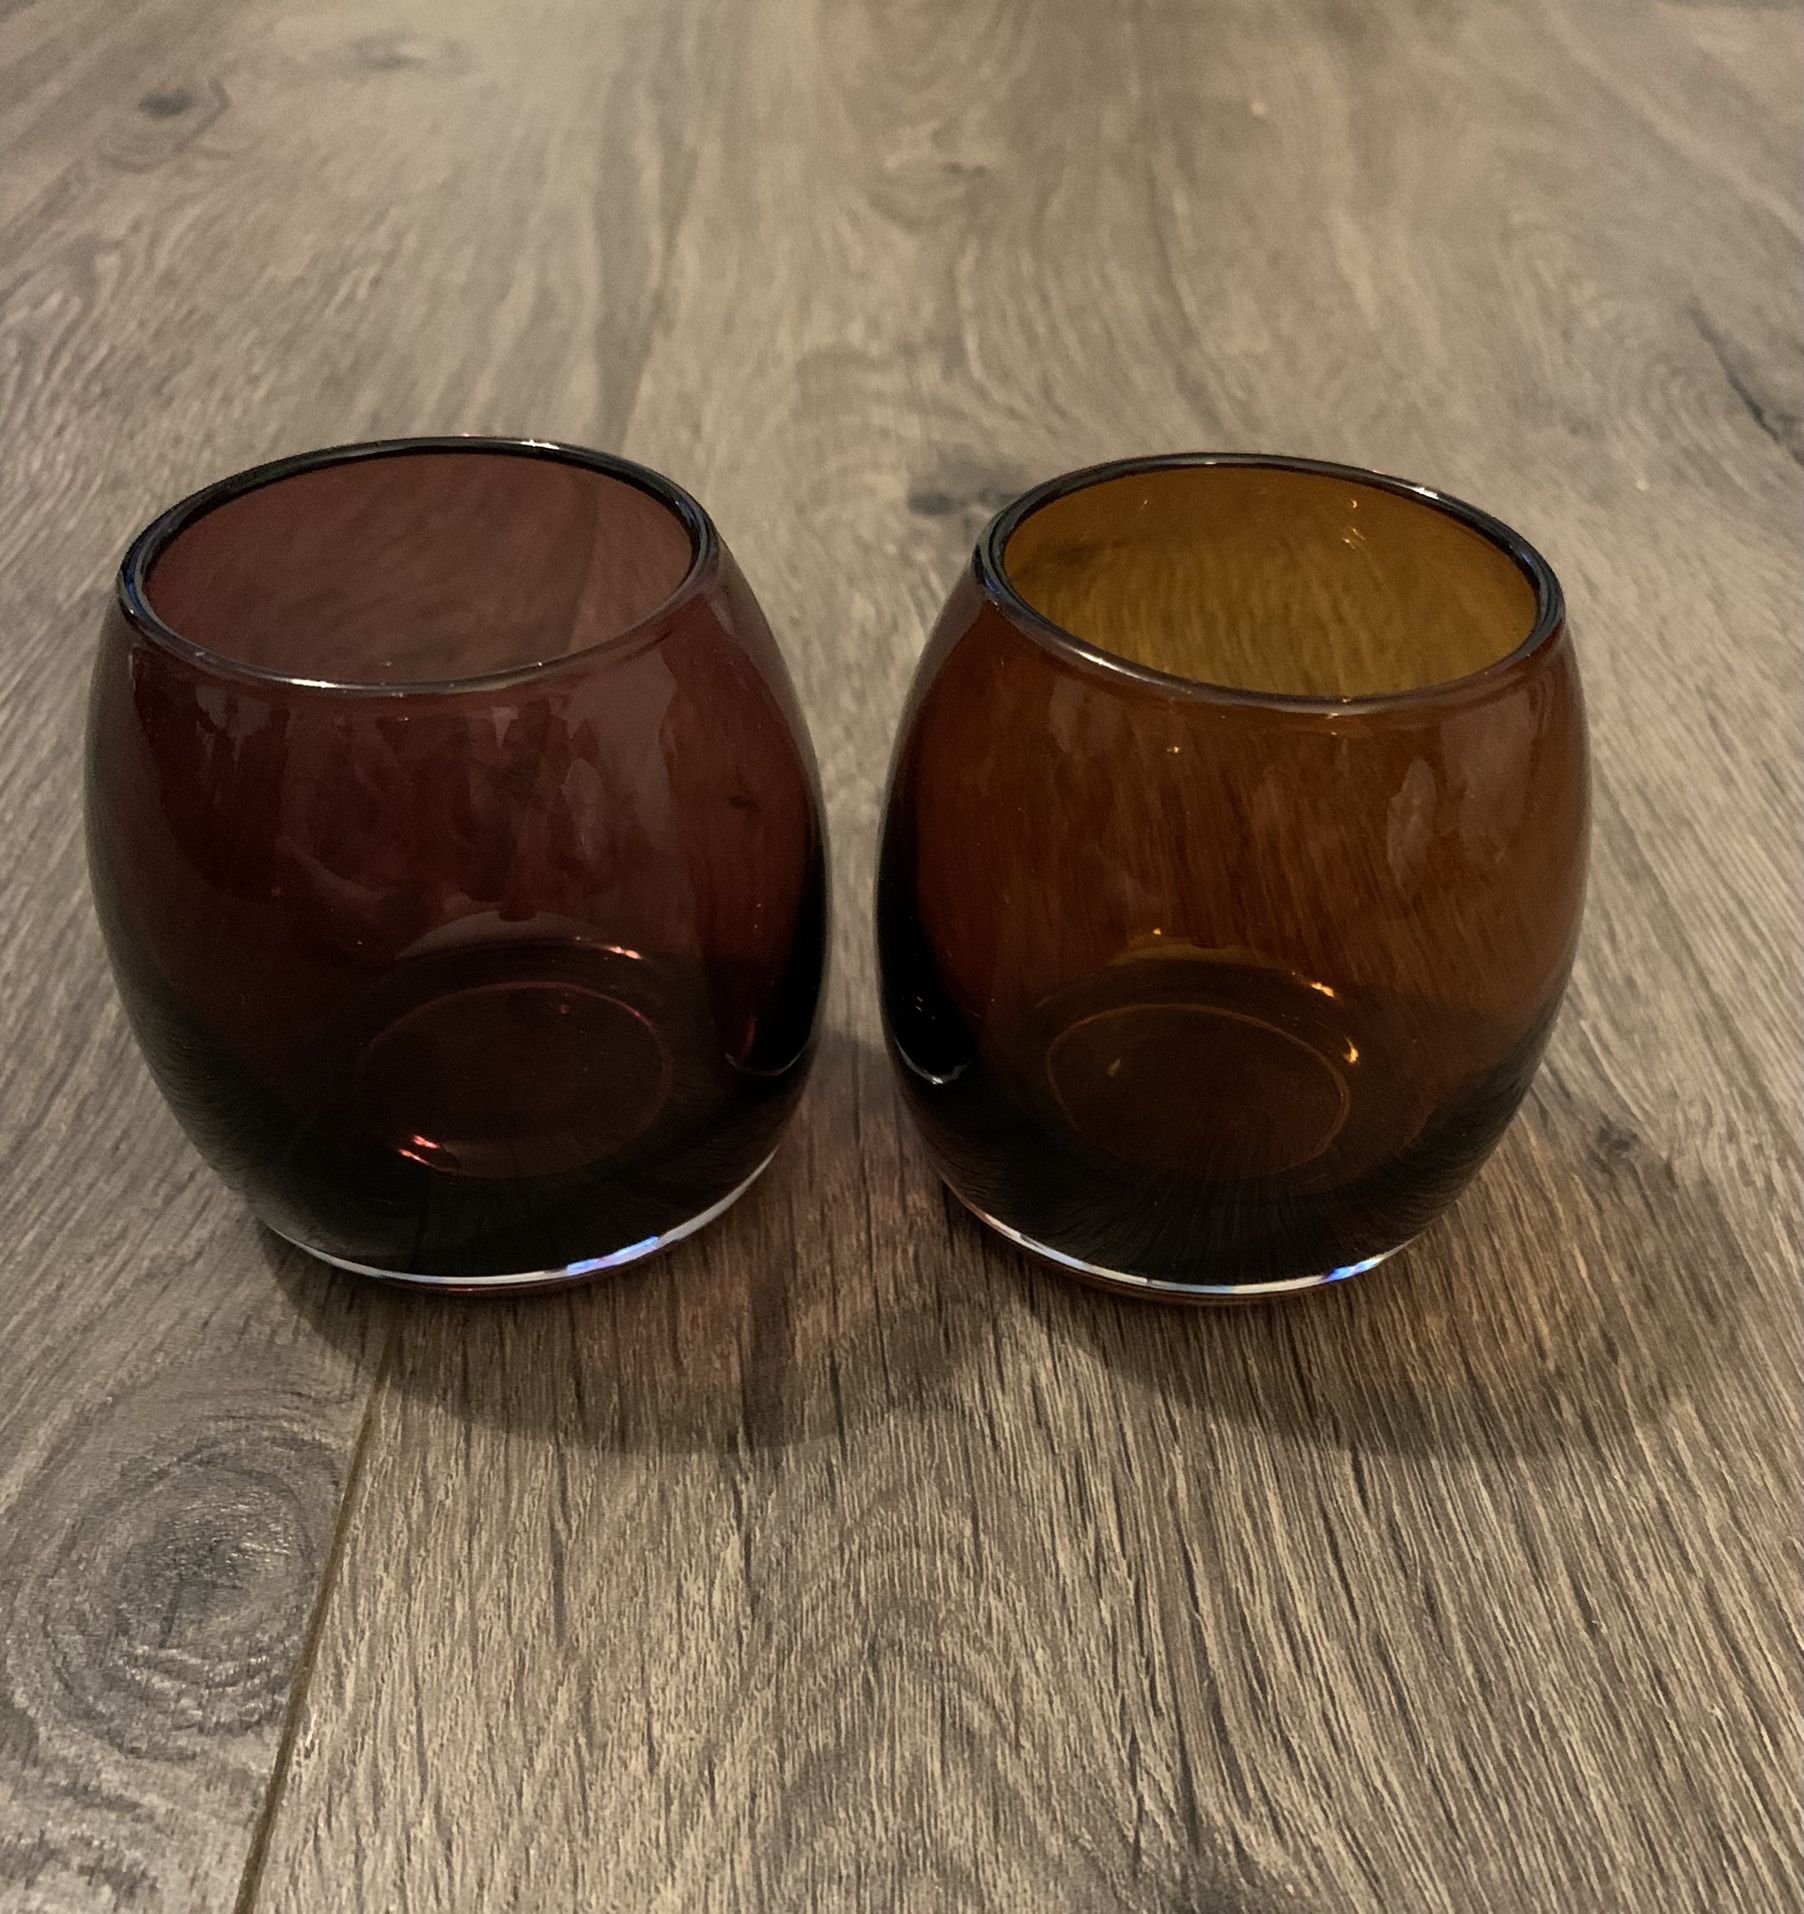 2 Partylite Votive Candle Holders - One Purple, One Amber